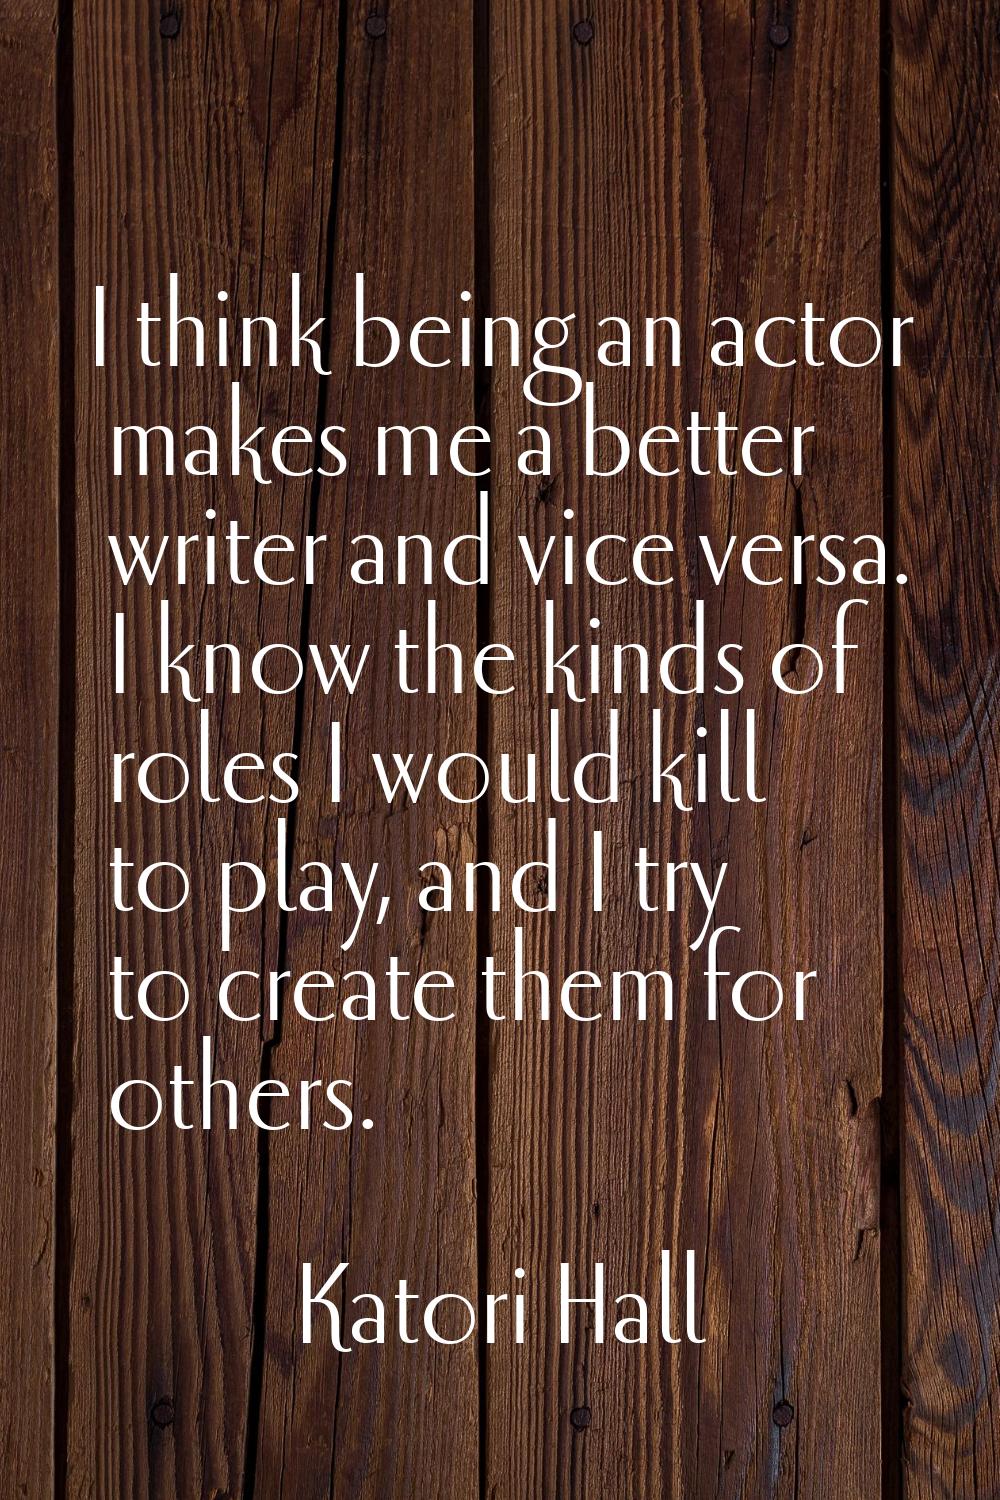 I think being an actor makes me a better writer and vice versa. I know the kinds of roles I would k